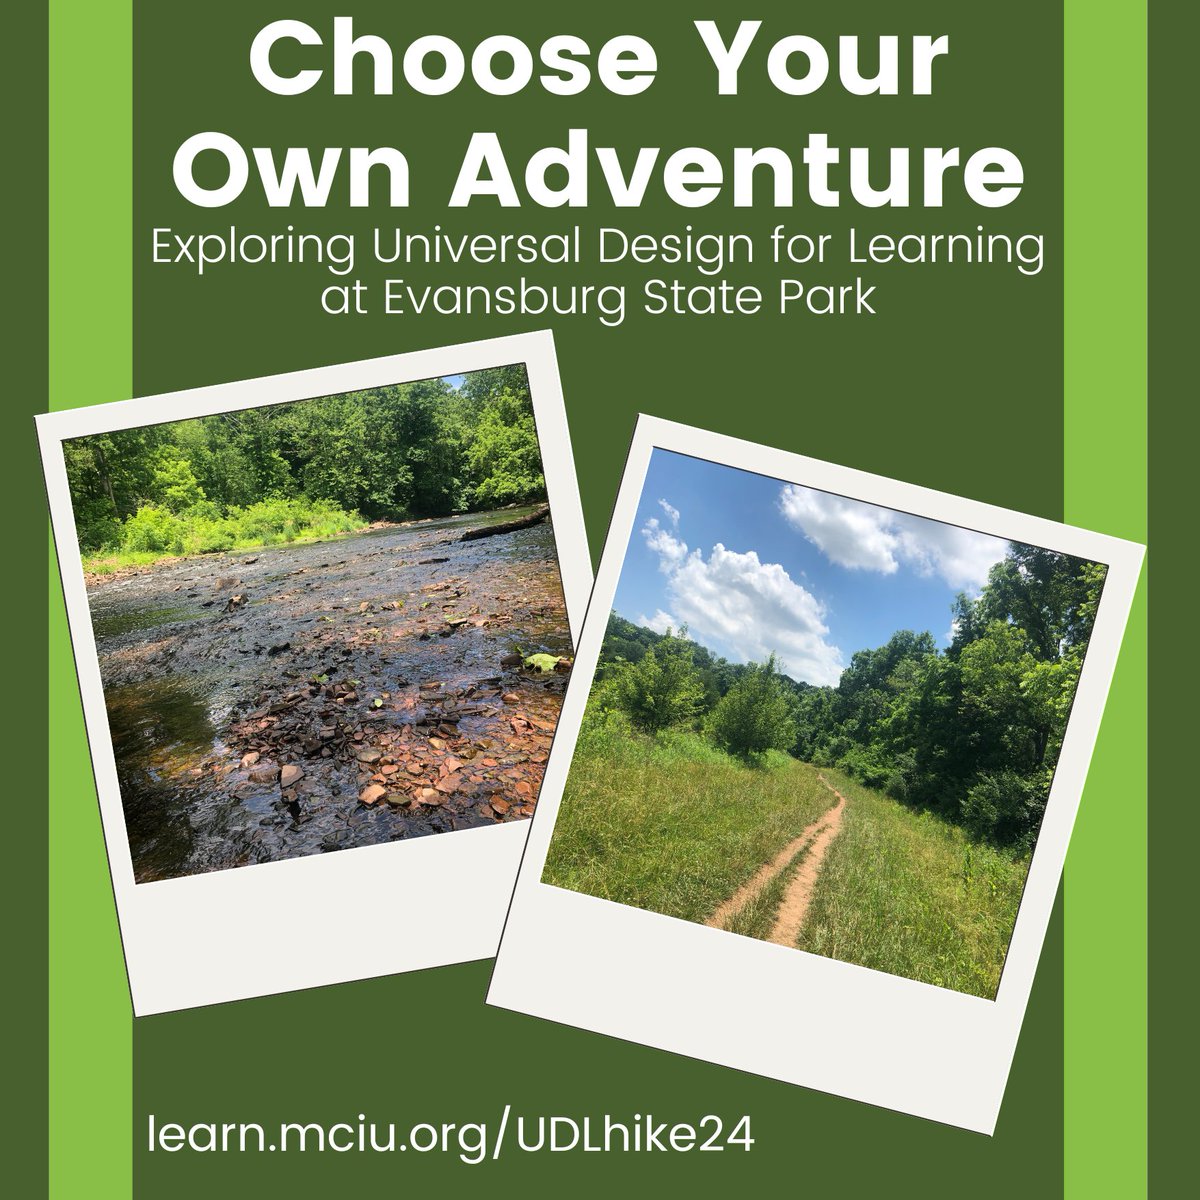 Develop #UDL mindset, connect place to intention, and make connections with UDL based on your individual role, all while having fun! 🚶‍♂️ learn.mciu.org/UDLhike24 #UniversalDesignforLearning @UDLPartners